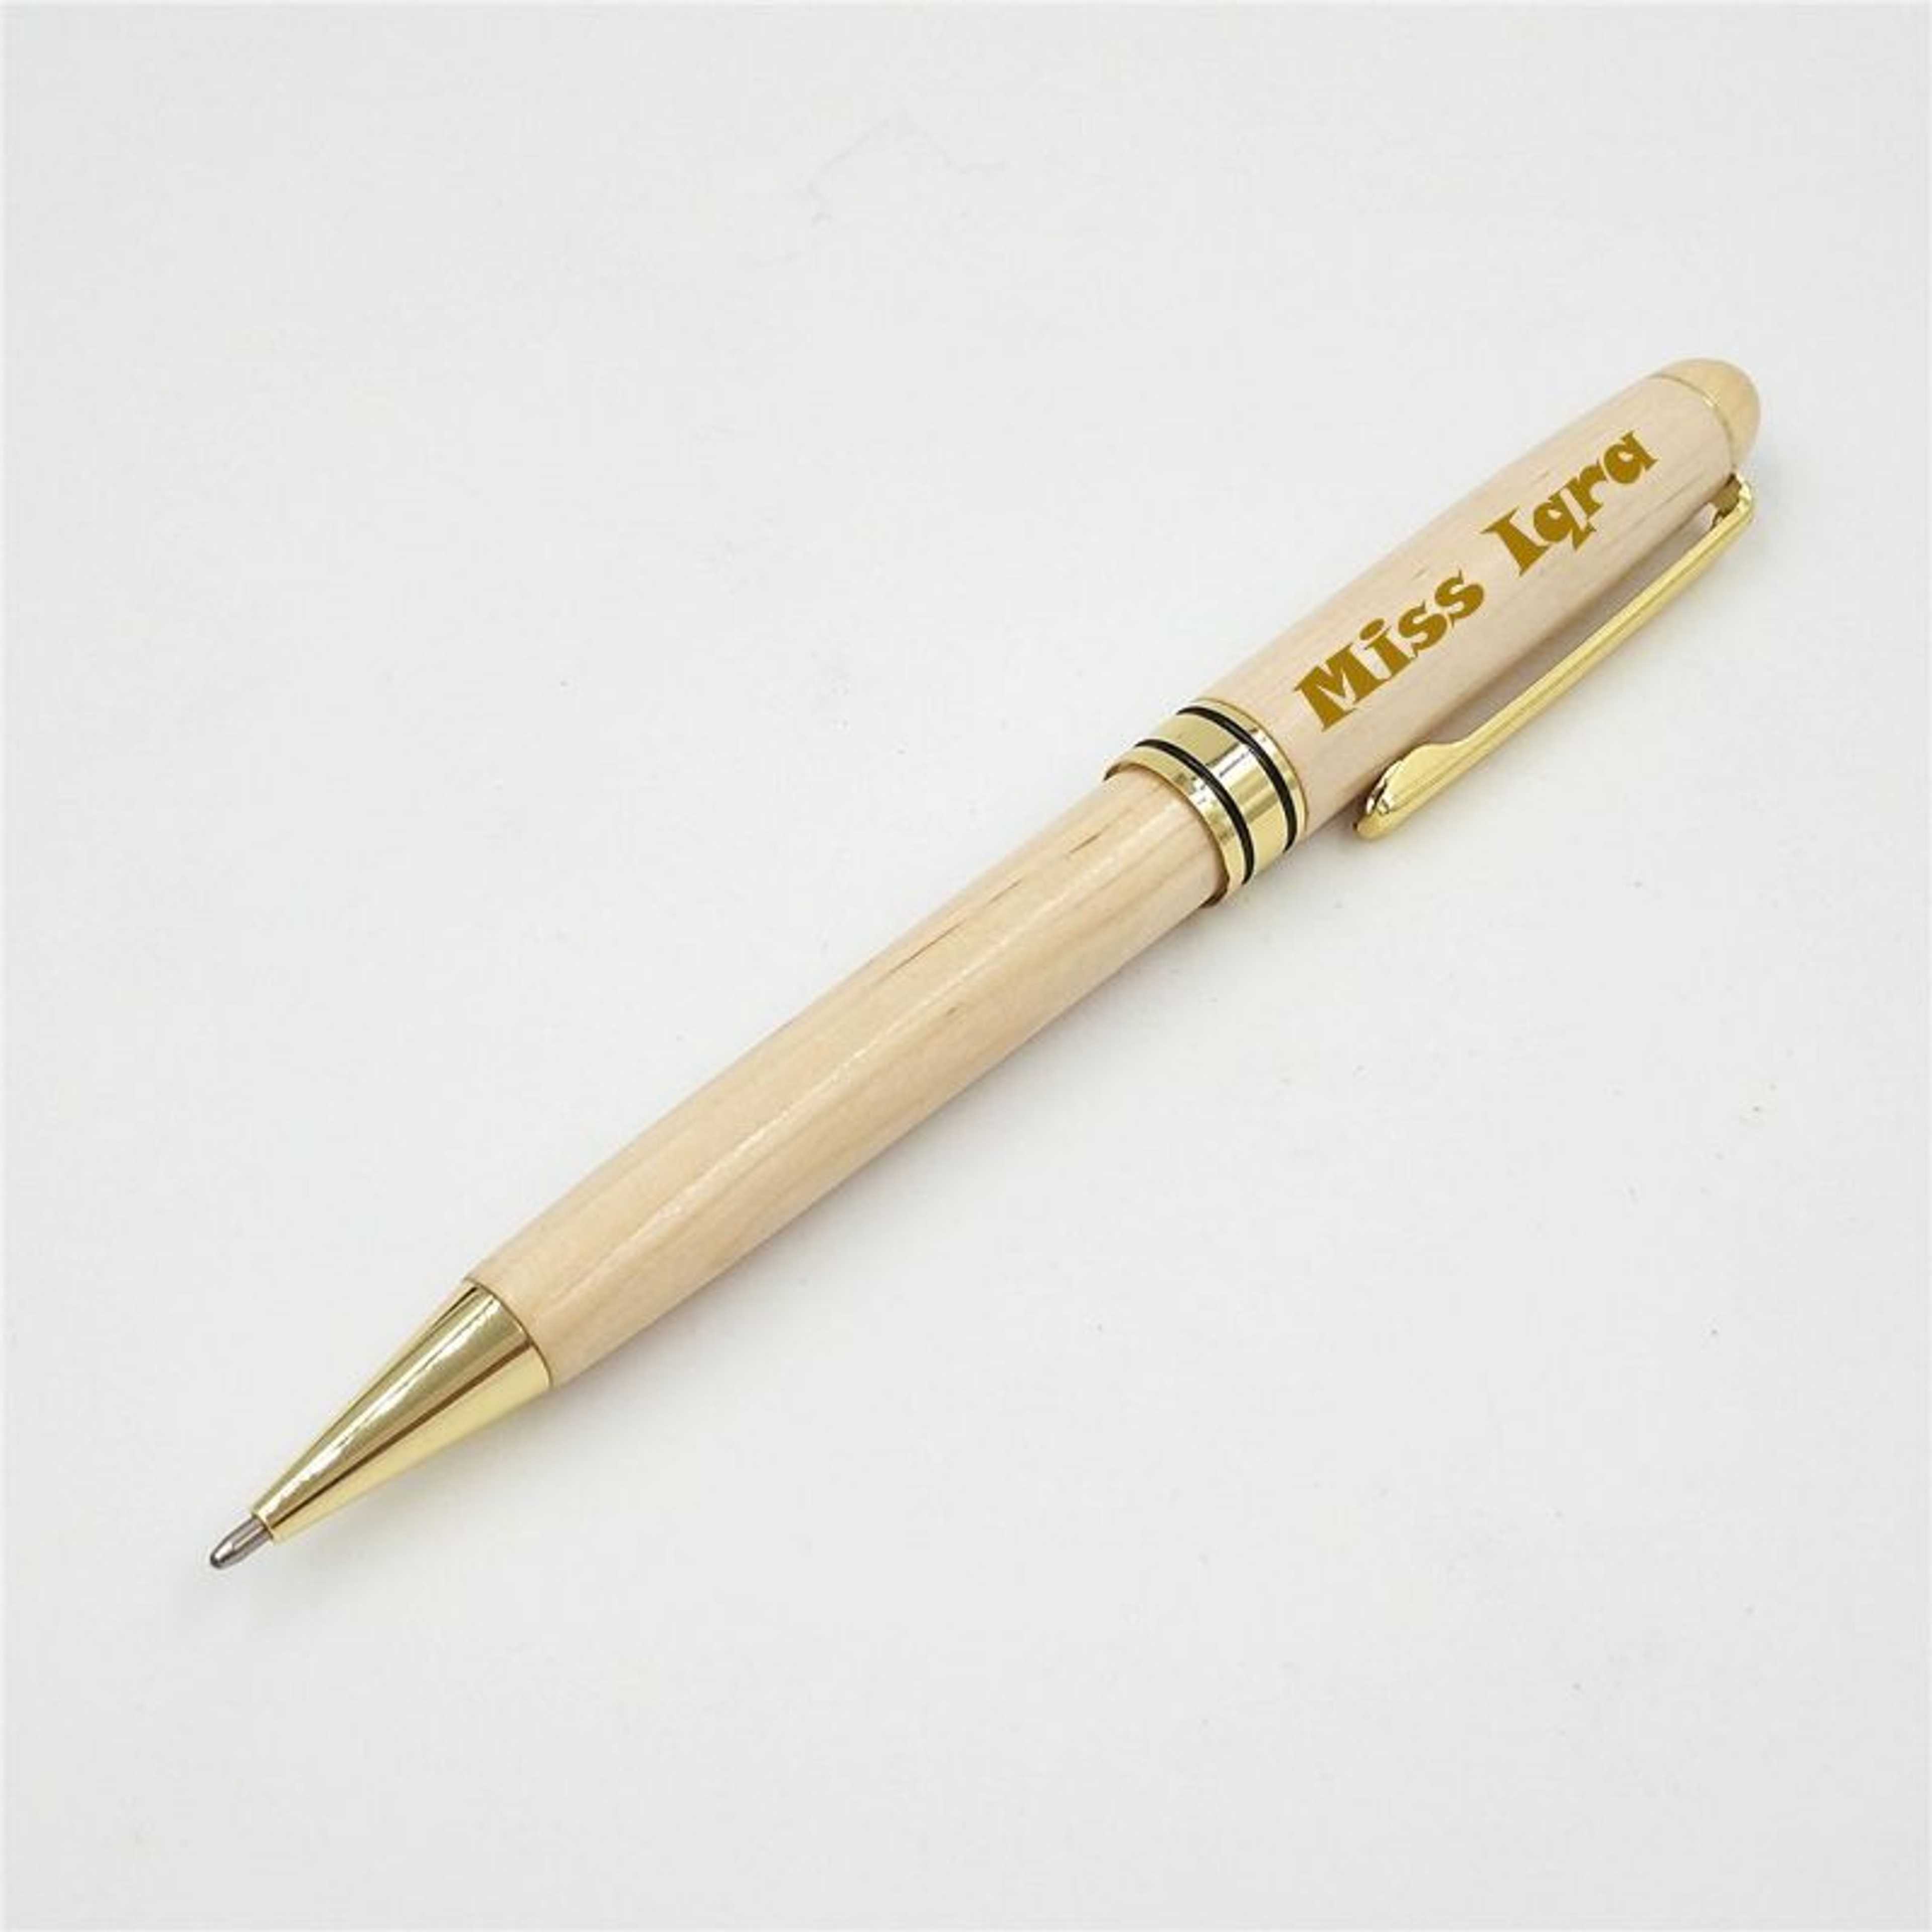 Wooden Customized Engraved Ball Pen -- Customized Name